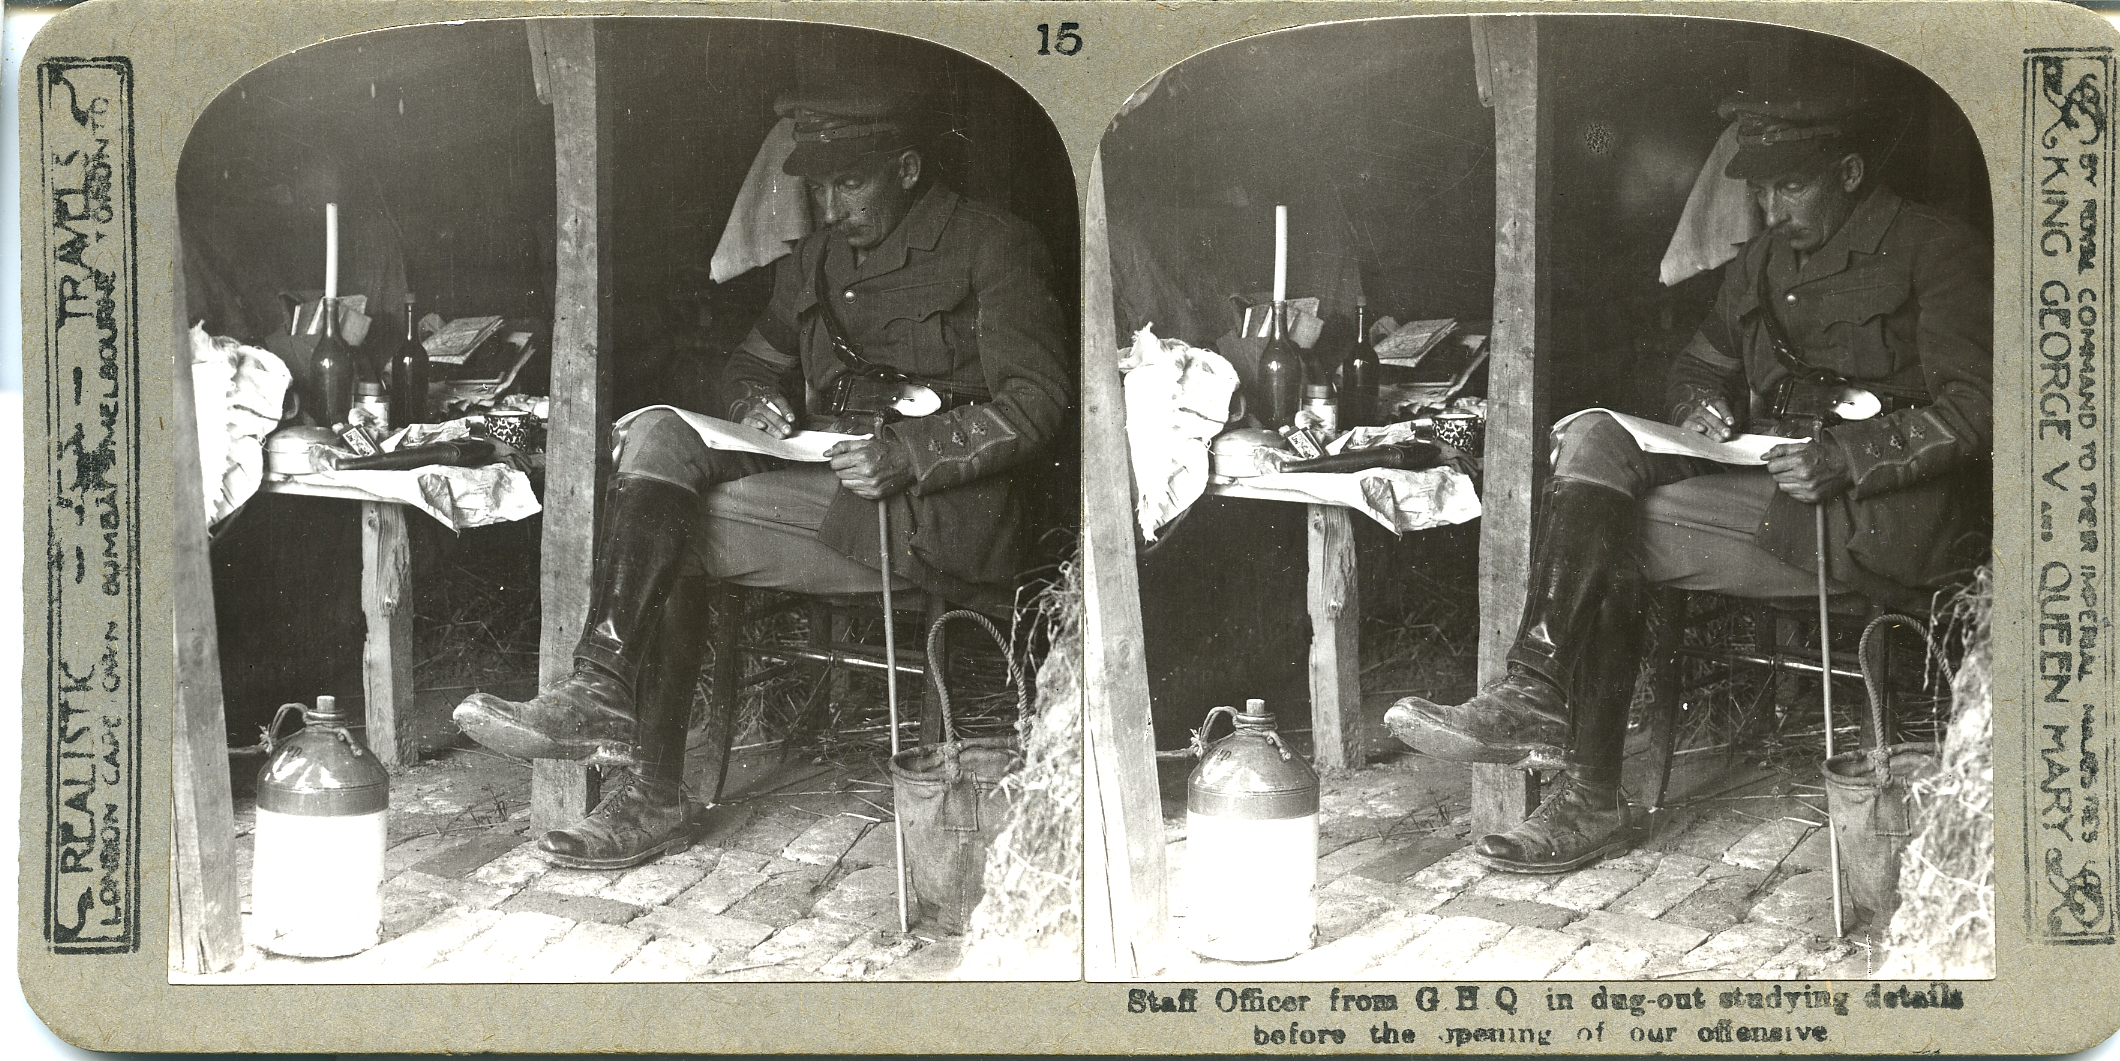 Staff Officer from G.H.Q. in dug-out, studying details before the opening of our offensive